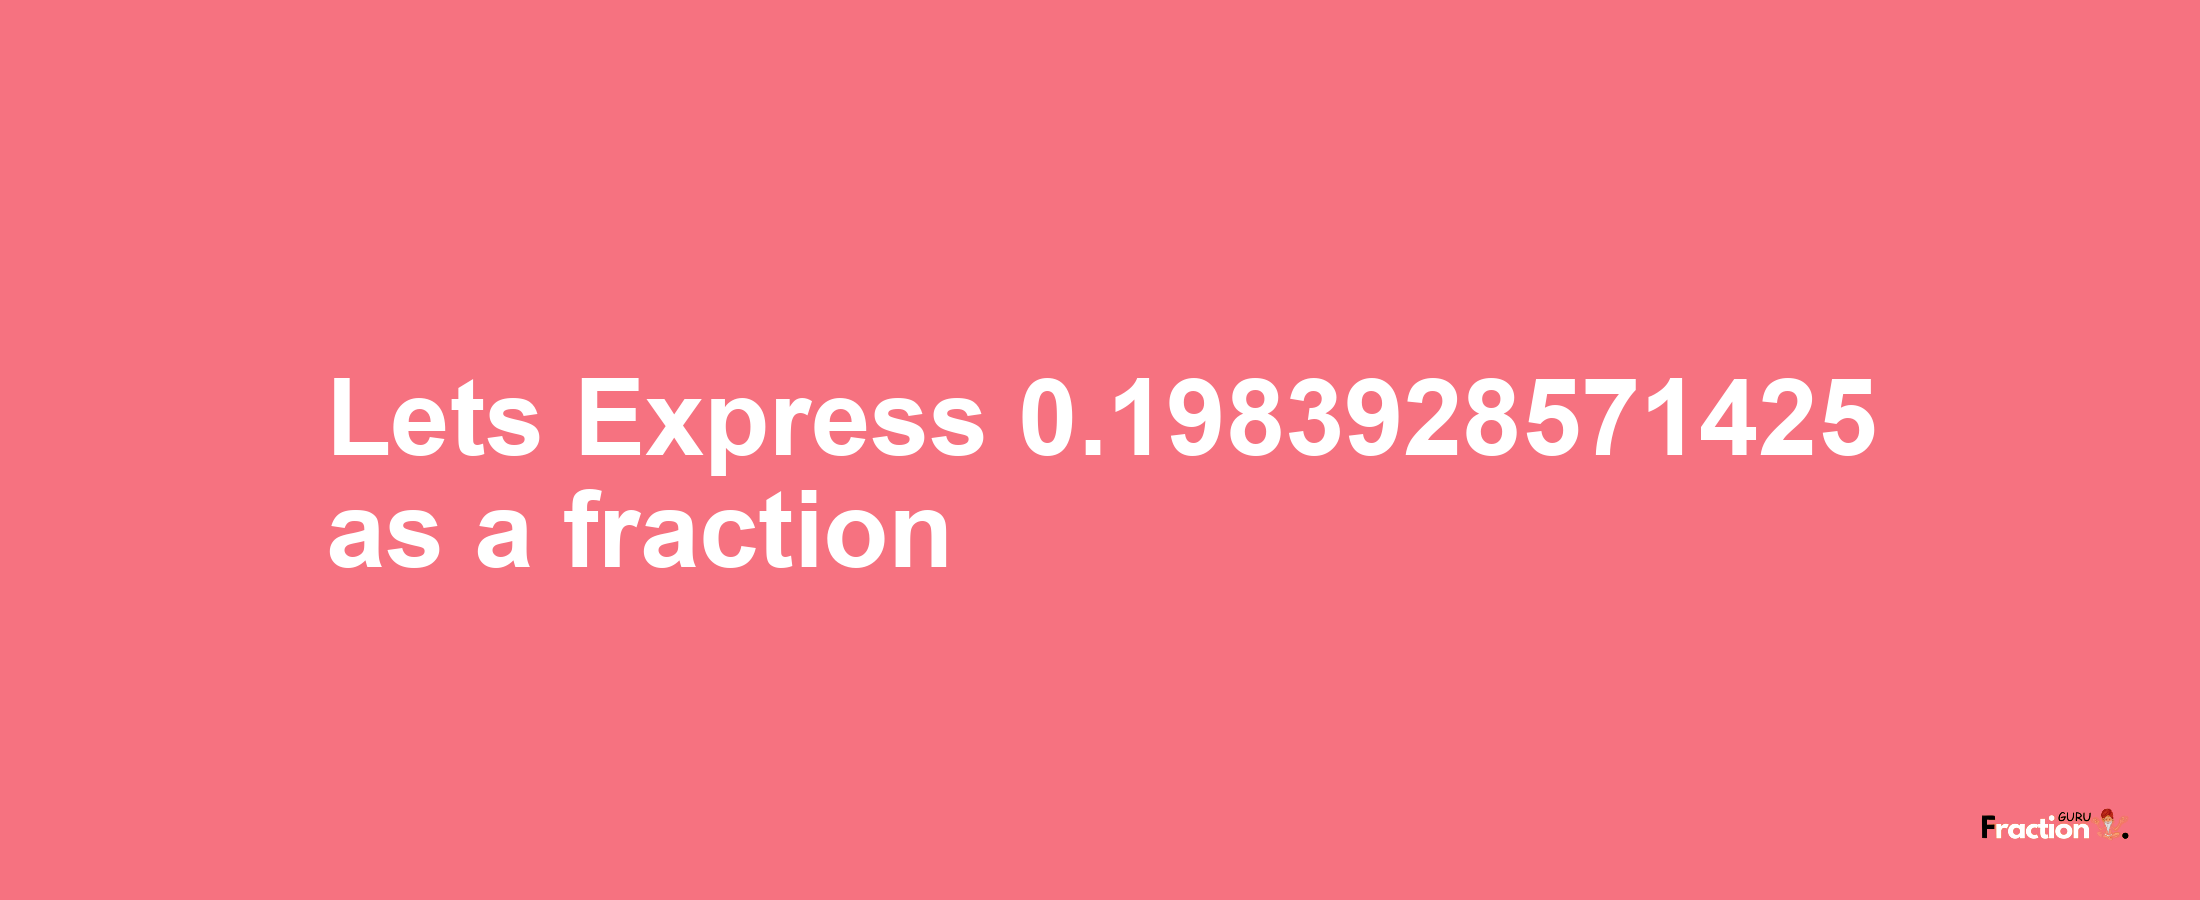 Lets Express 0.1983928571425 as afraction